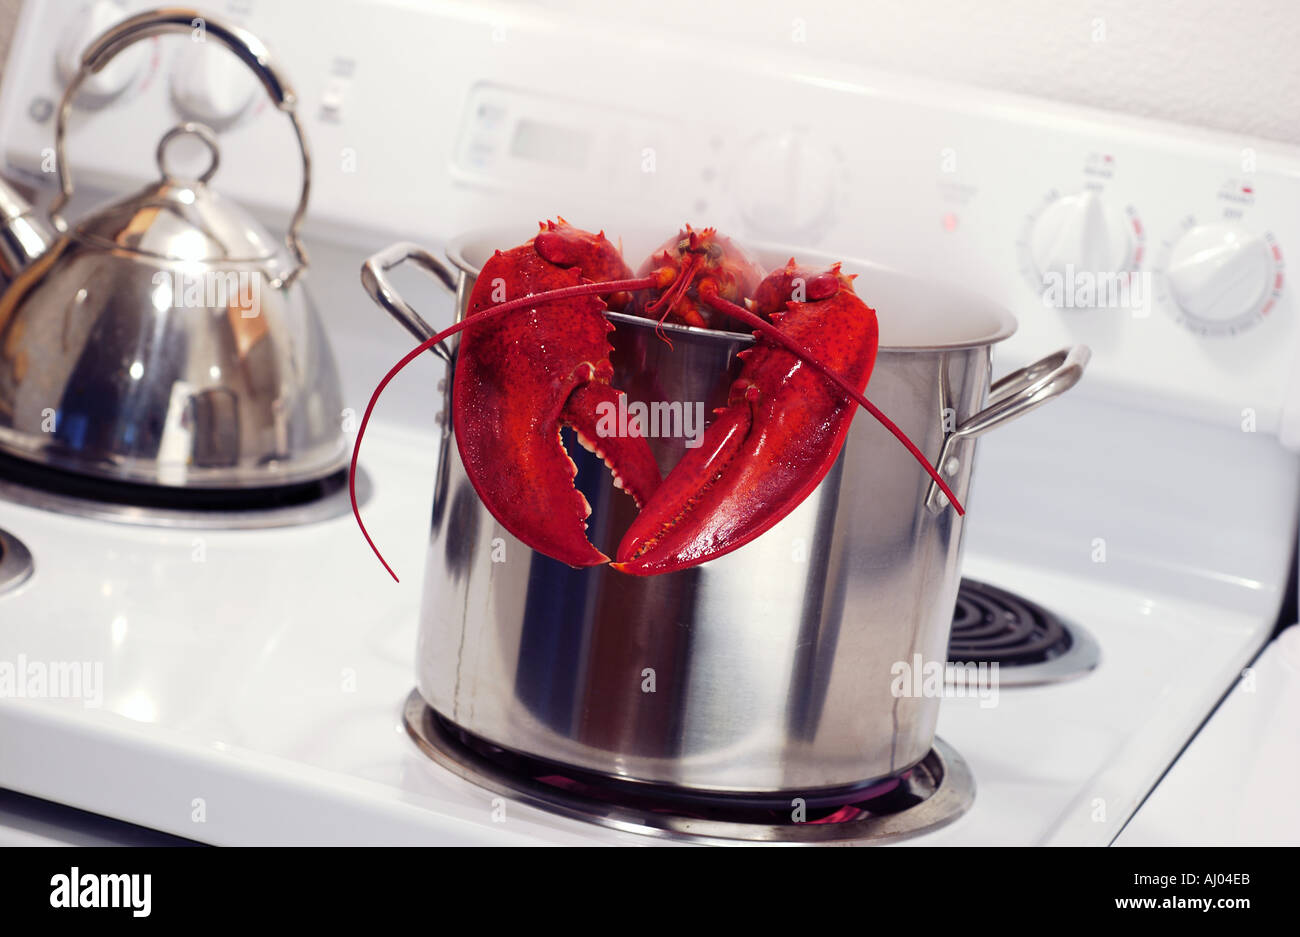 Lobster in Pot on Stove Cooking Stock Photo